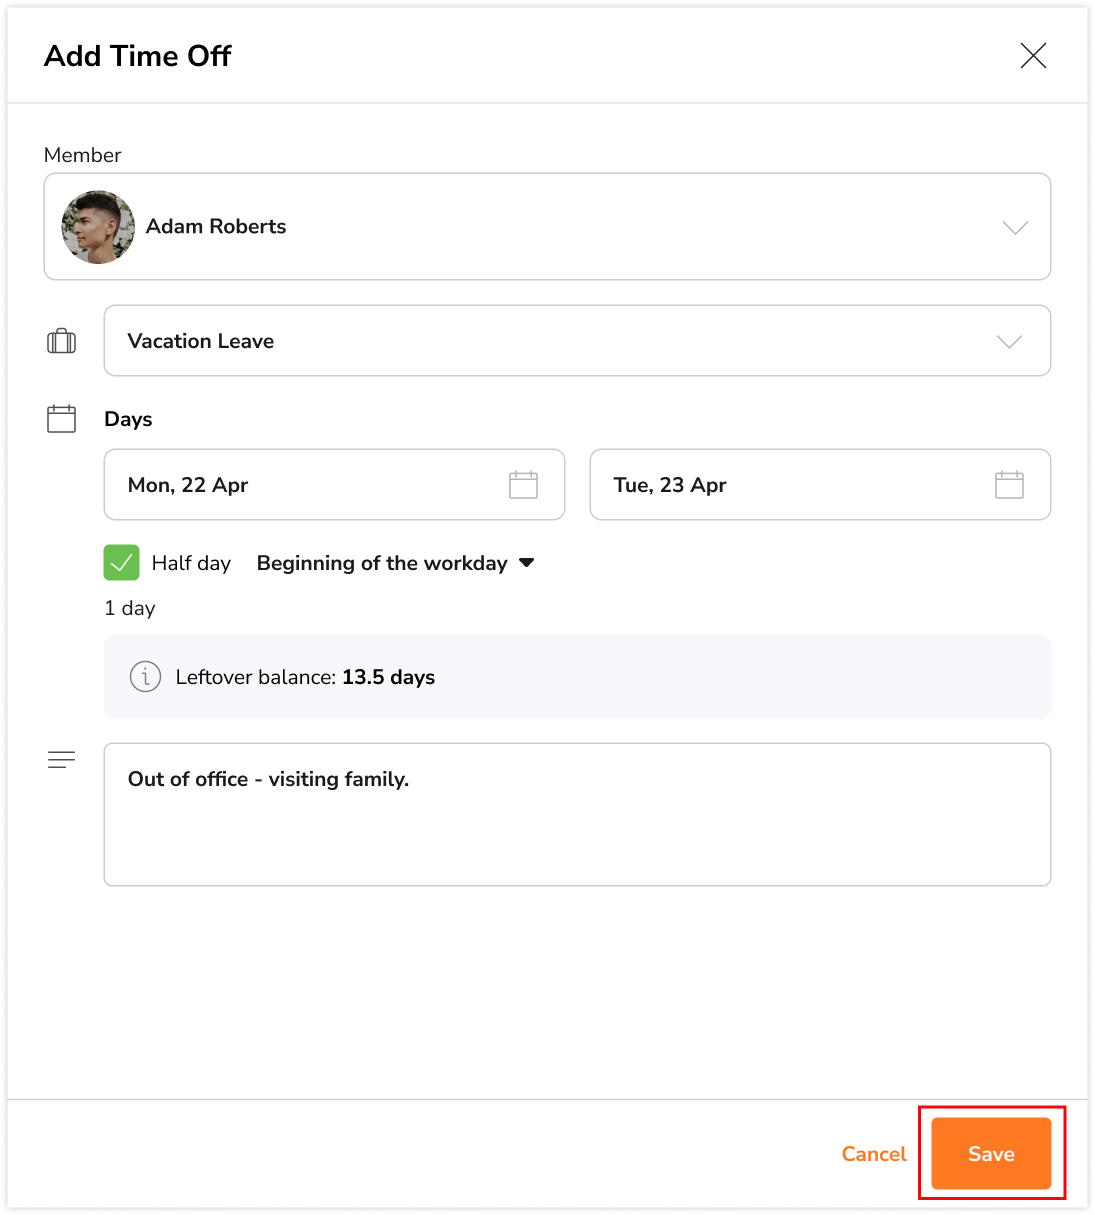 Adding notes and saving time off request